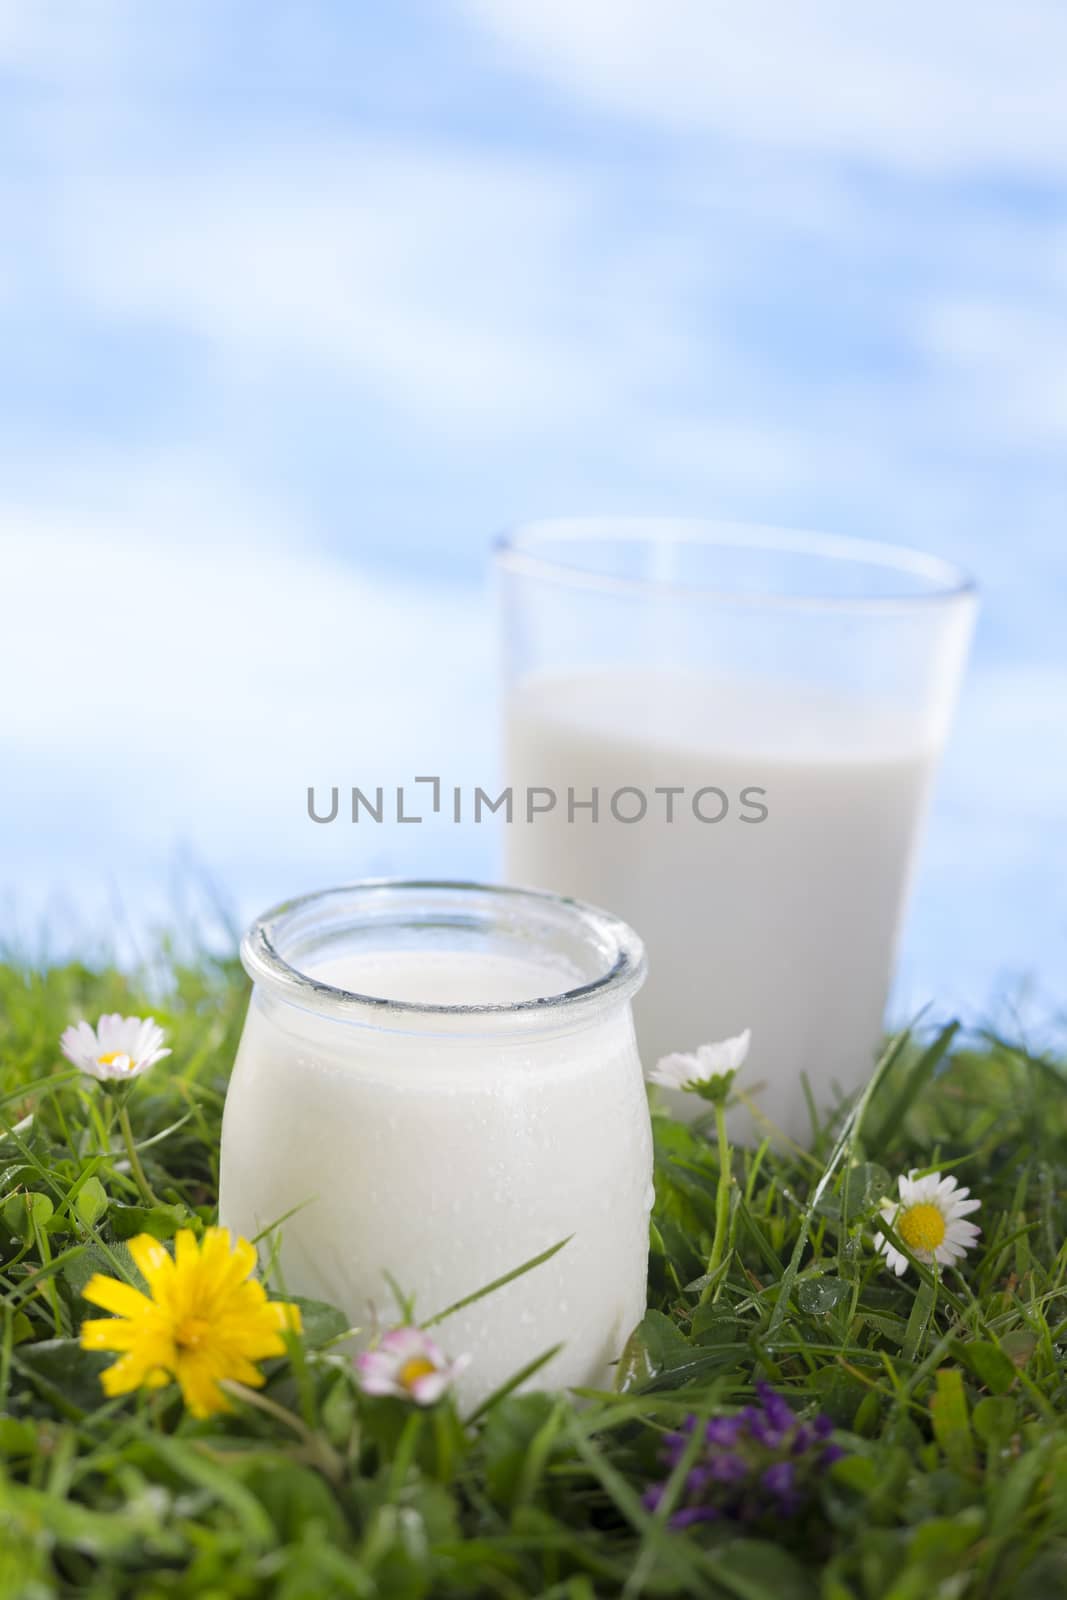 yogurt and milk jug on the grass with flowers by JPC-PROD